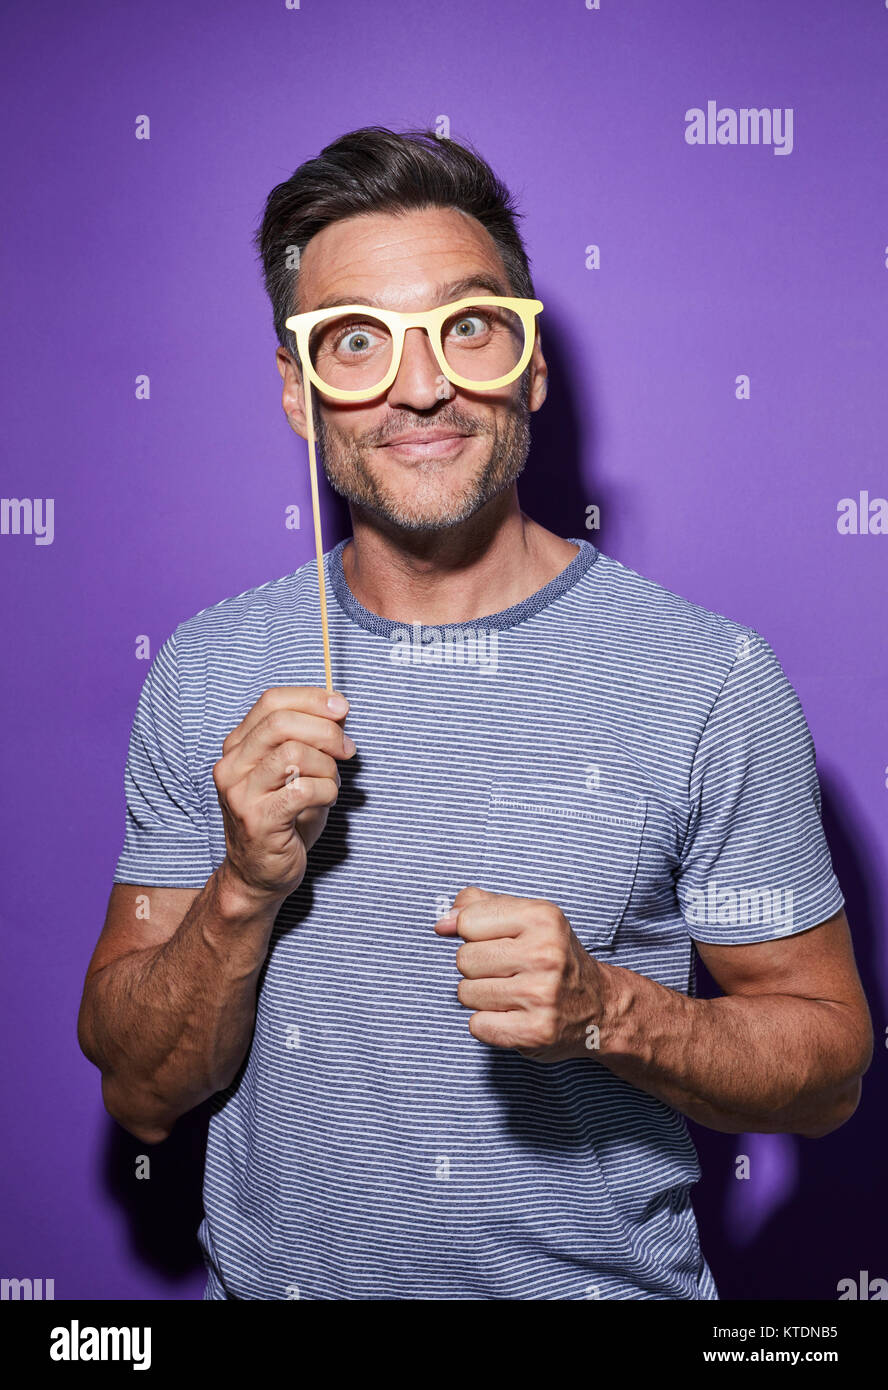 Portrait of starring man with comedy glasses Stock Photo